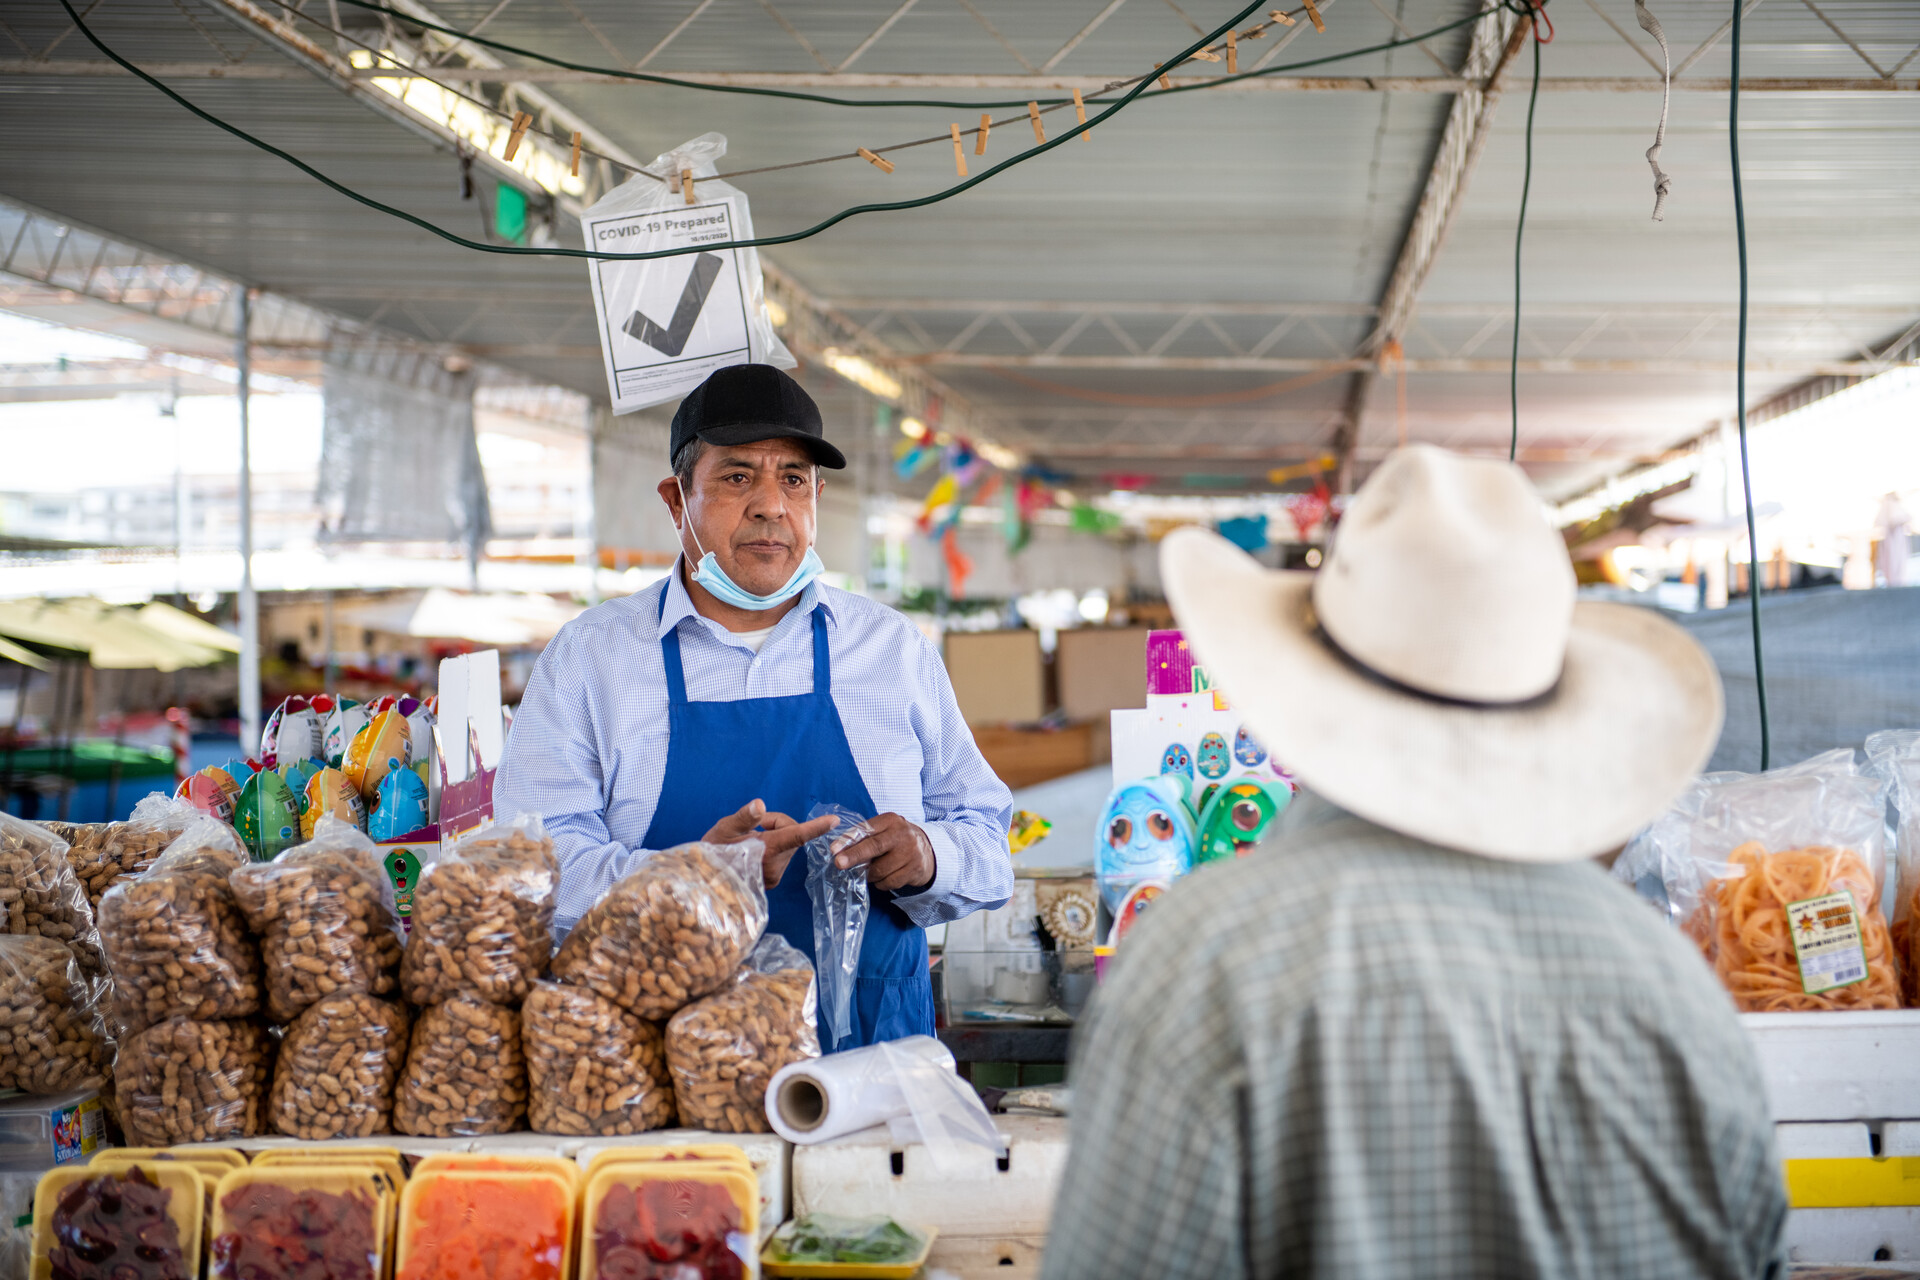 Cayetano Araújo speaks with a customer that is wearing a cowboy hat at his stall on Wednesday, May 26, 2021.